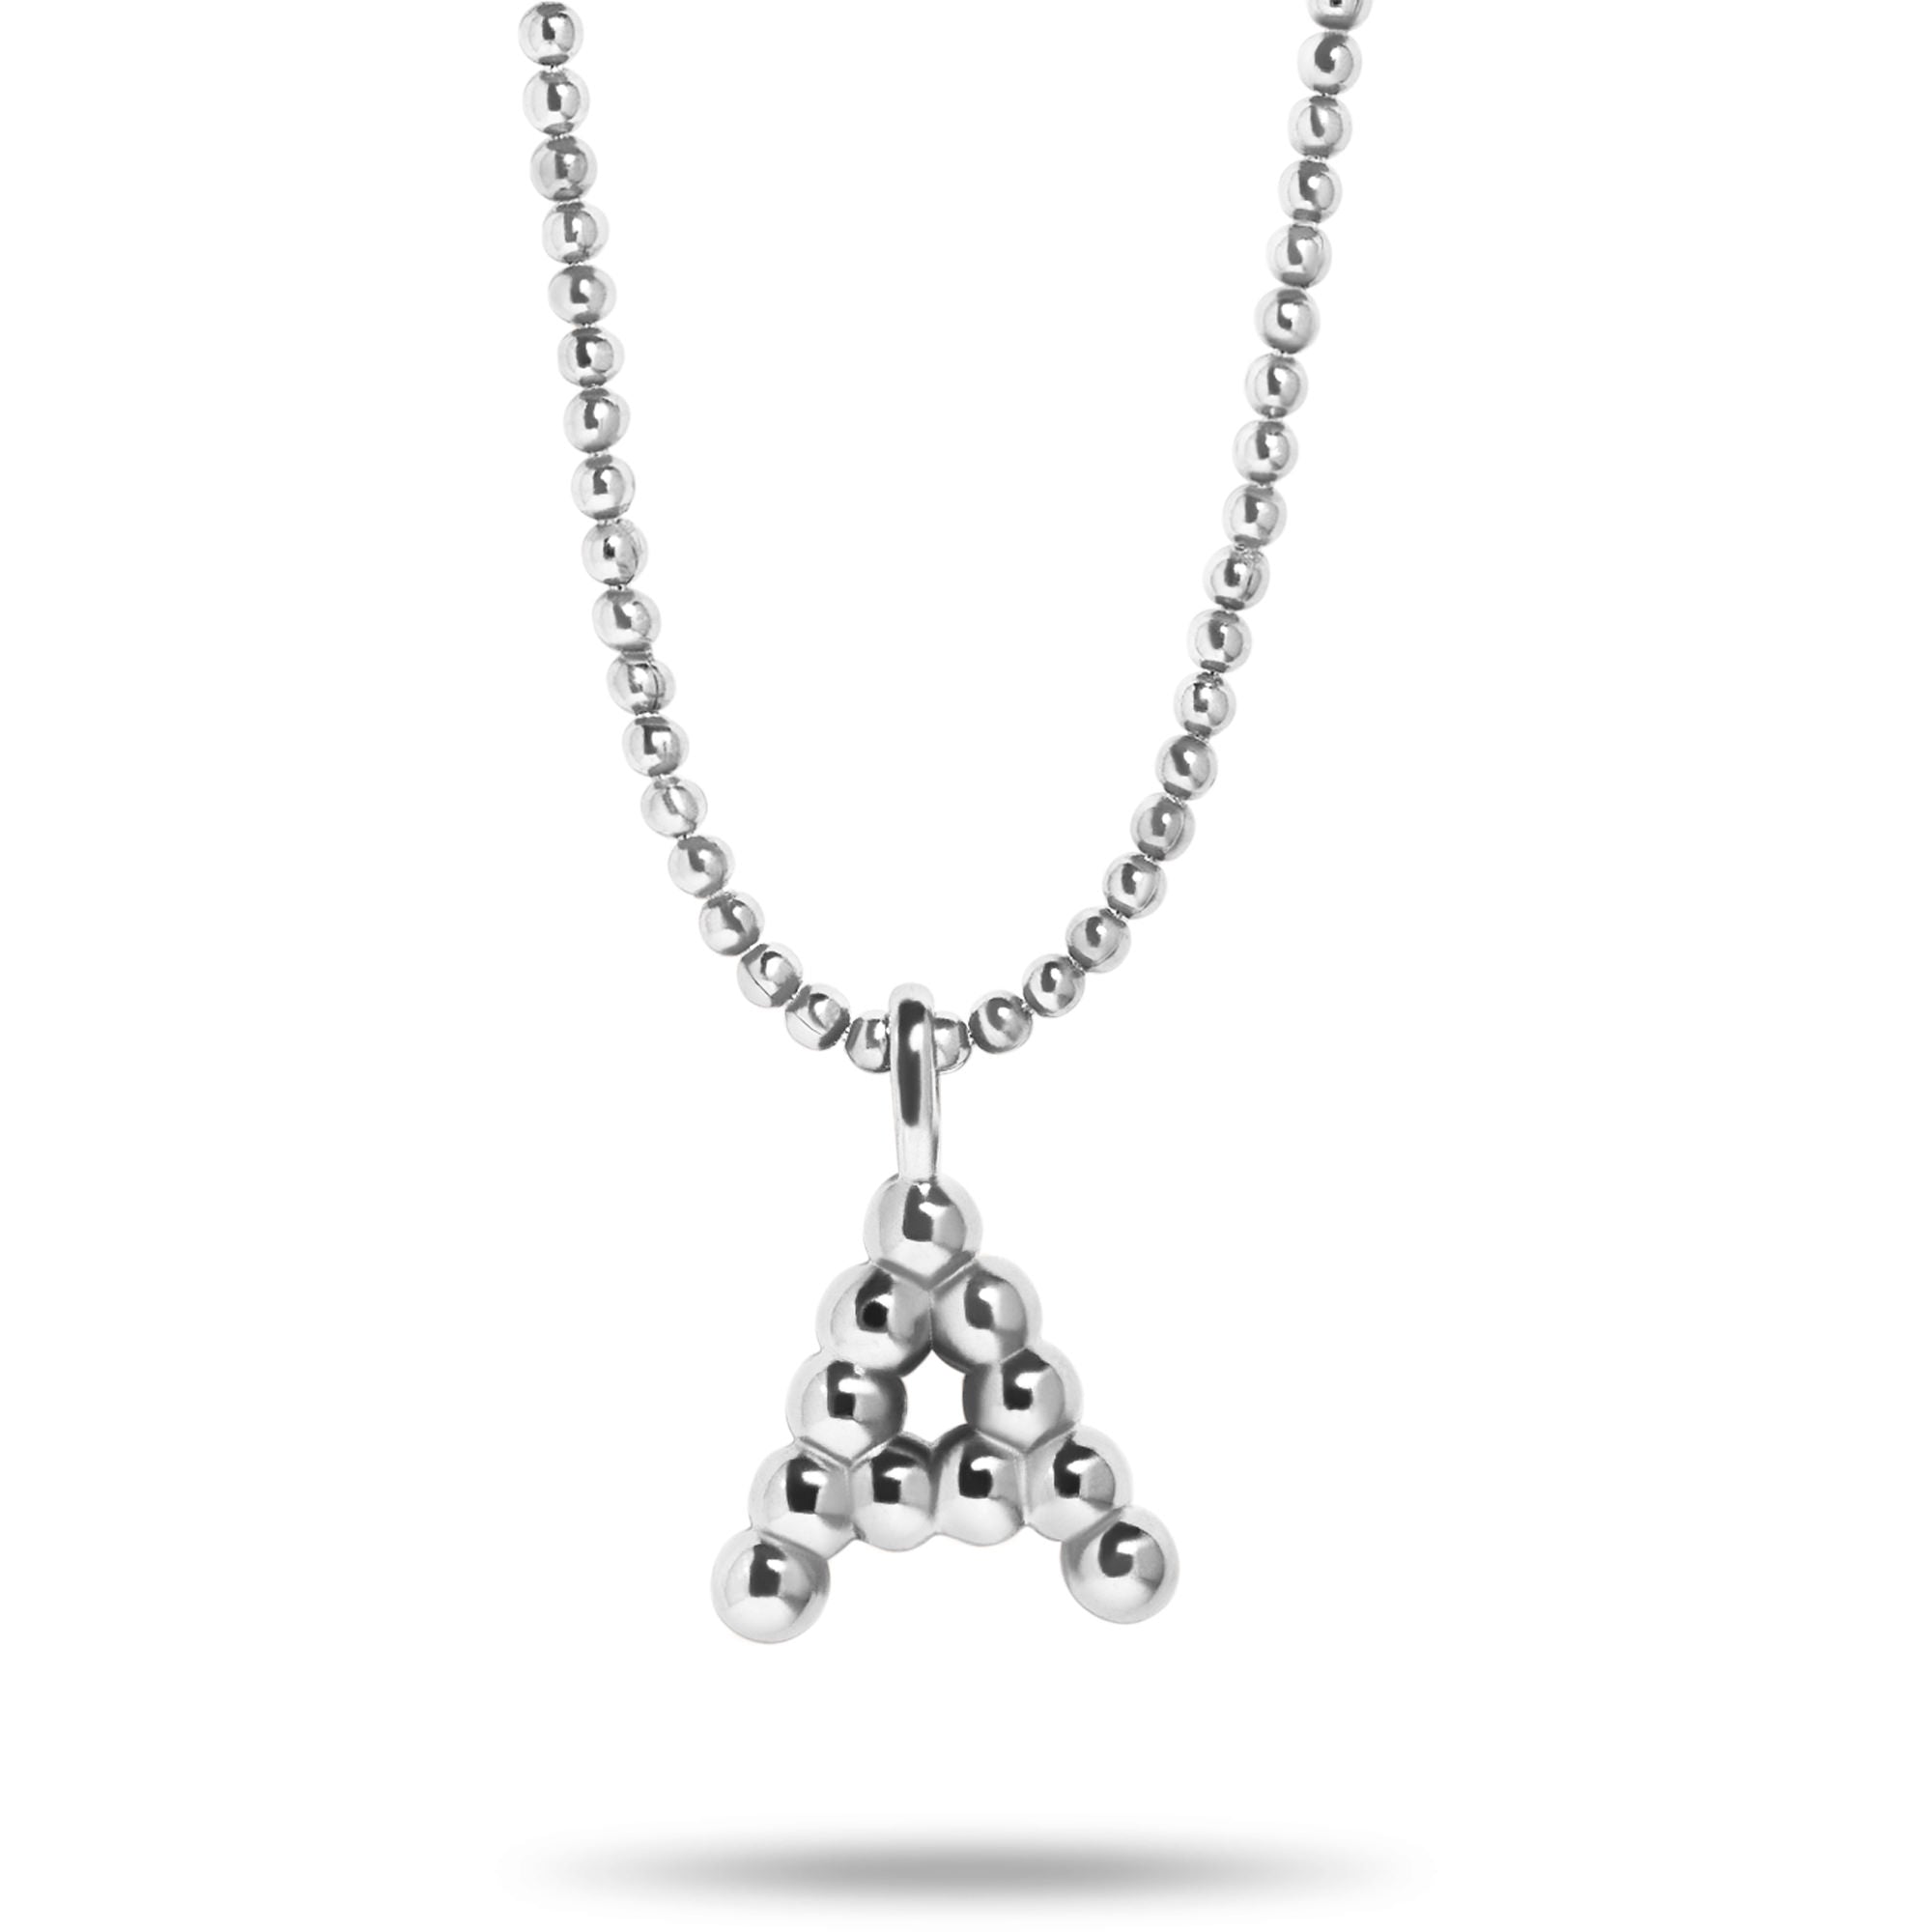 ChicSilver Sterling Silver Initial Necklace for Women Girls Cubic Zirconia  Letter C Pendant Necklace Name Personalized Jewelry - Walmart.com